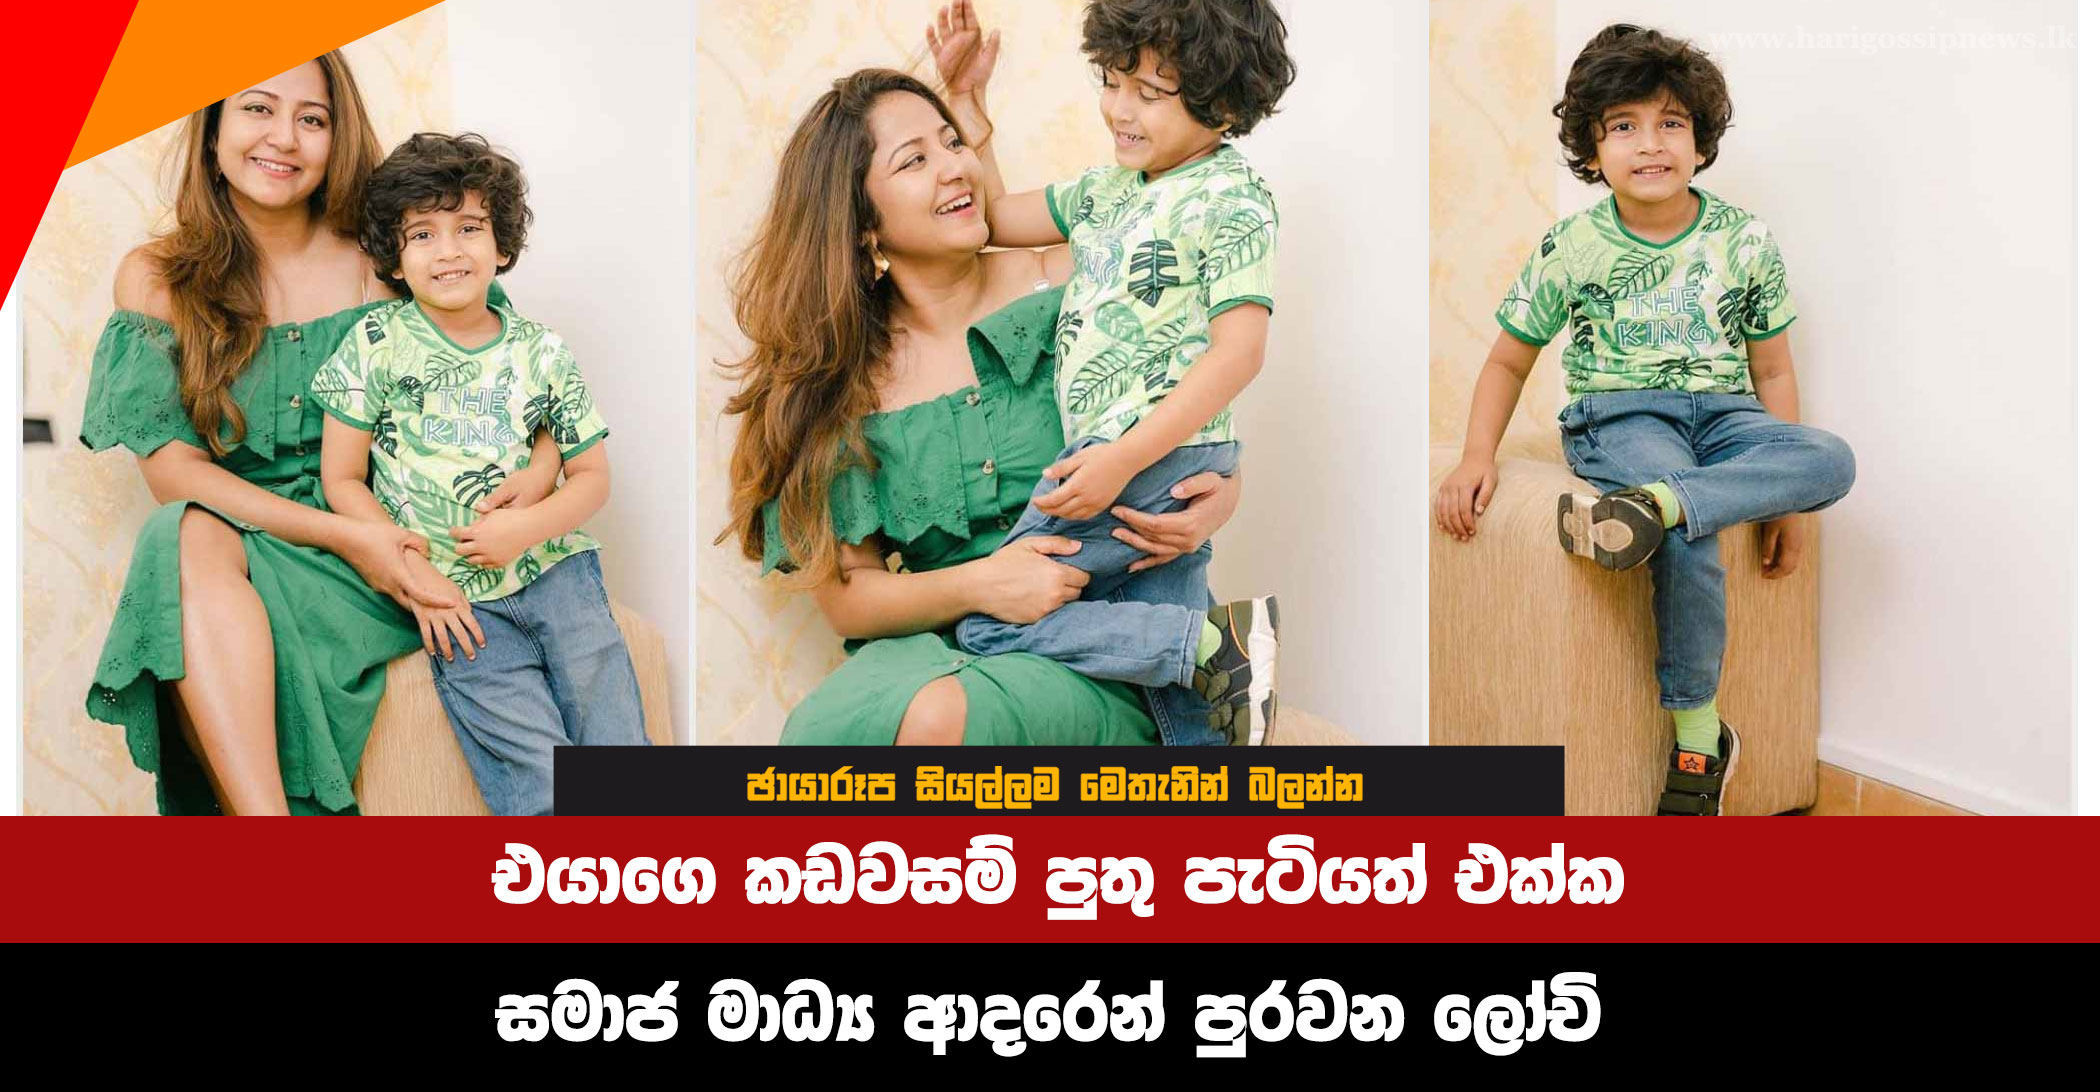 Lochi,-who-fills-social-media-with-love,-with-her-handsome-son